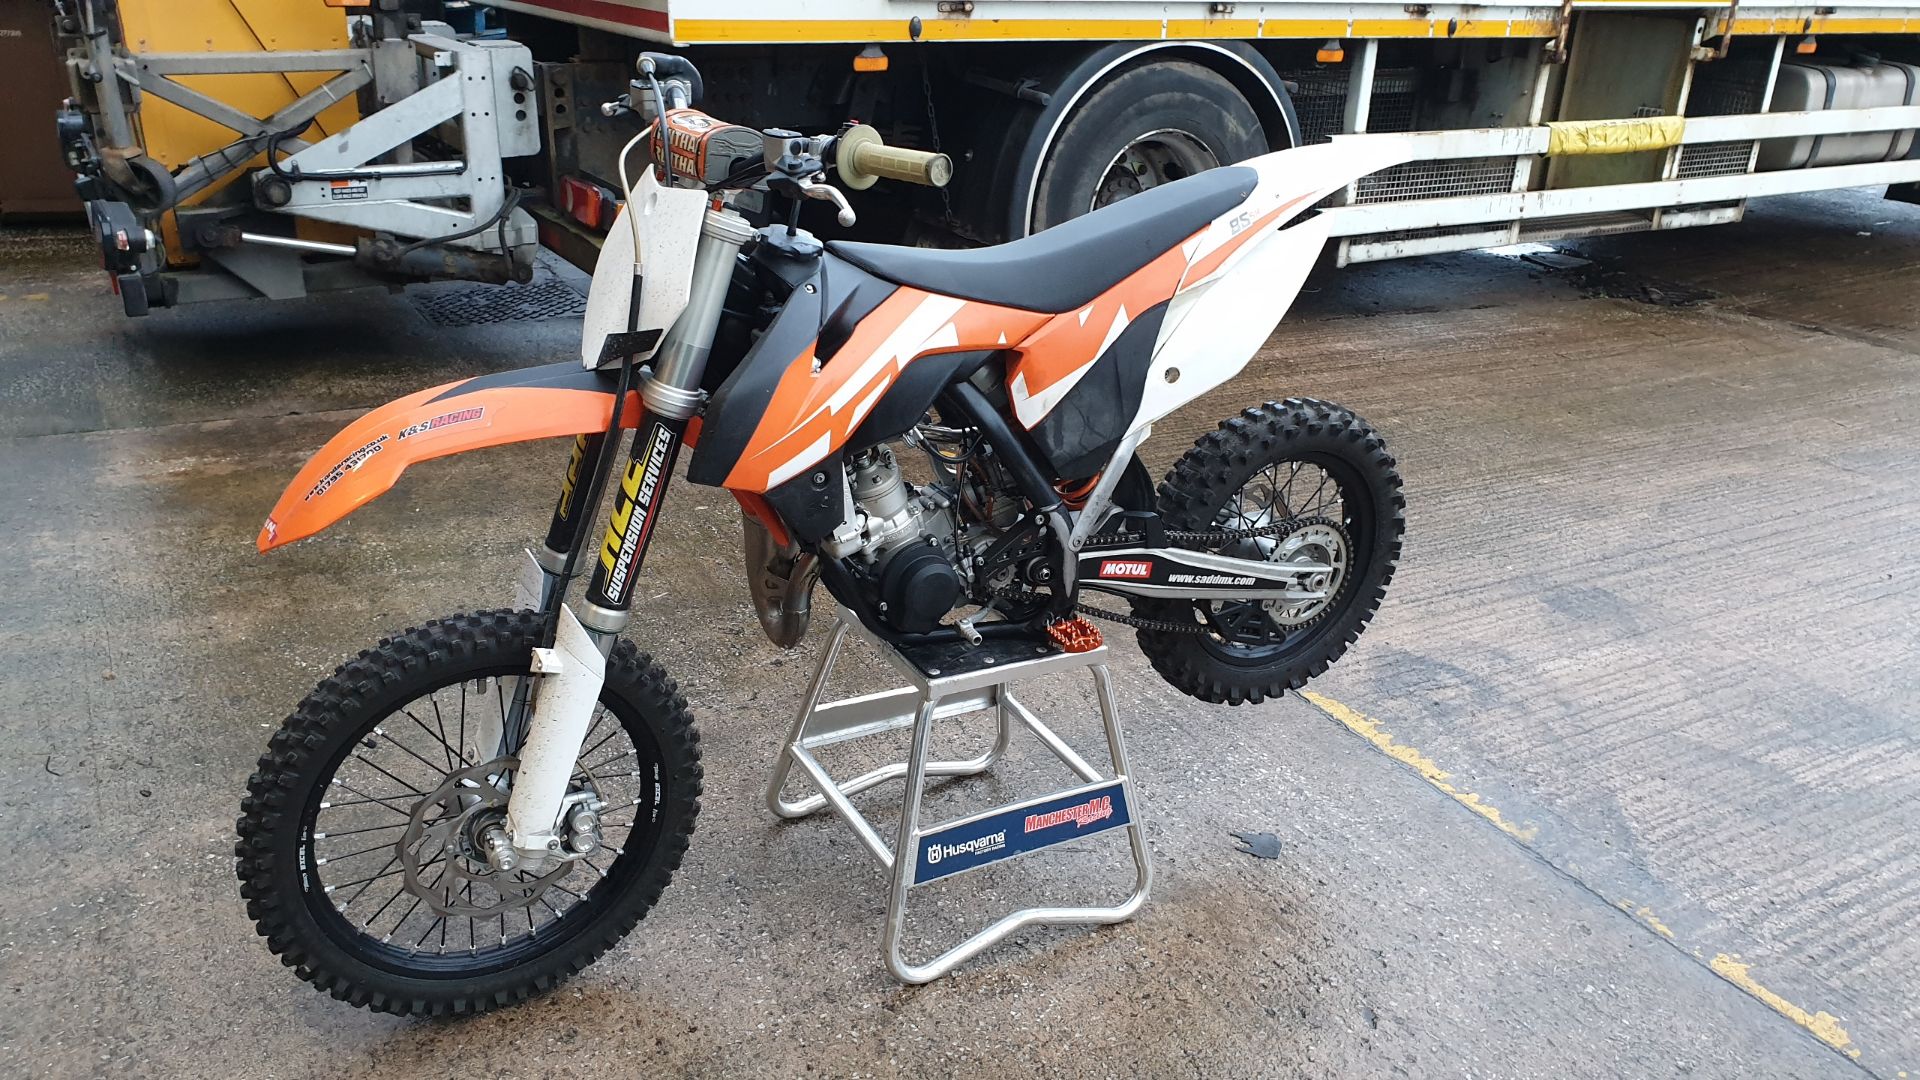 KTM SX 85 OFF ROAD MOTORCYCLE 2016 FRAME NO: VBKMXC231EM013315 ENGINE NO 1600828 2 OWNERS FROM NEW - Image 3 of 4